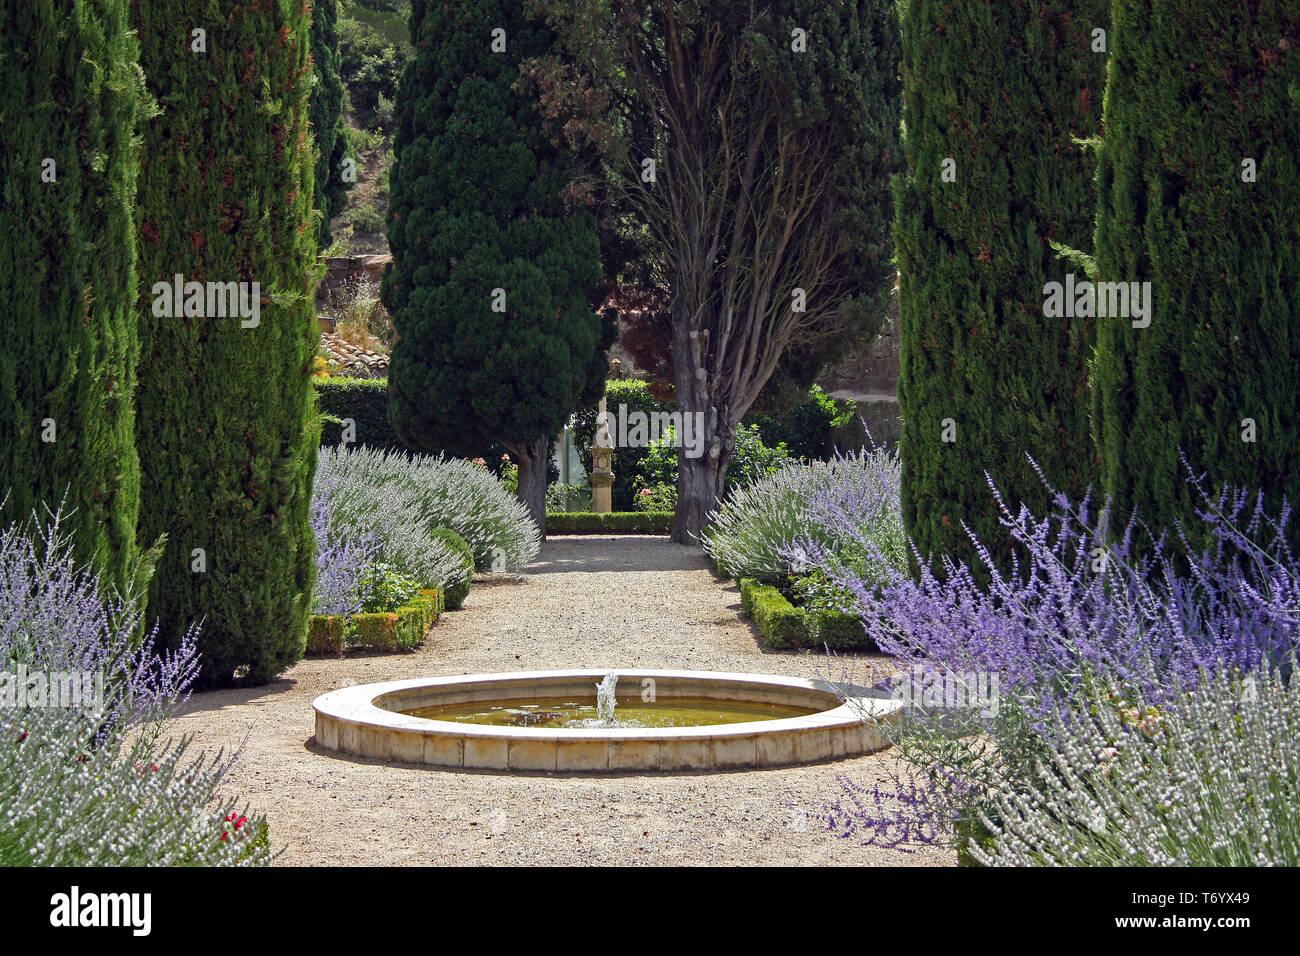 Monastery Garden, Abbey Fontfroide, Narbonne, France Stock Photo